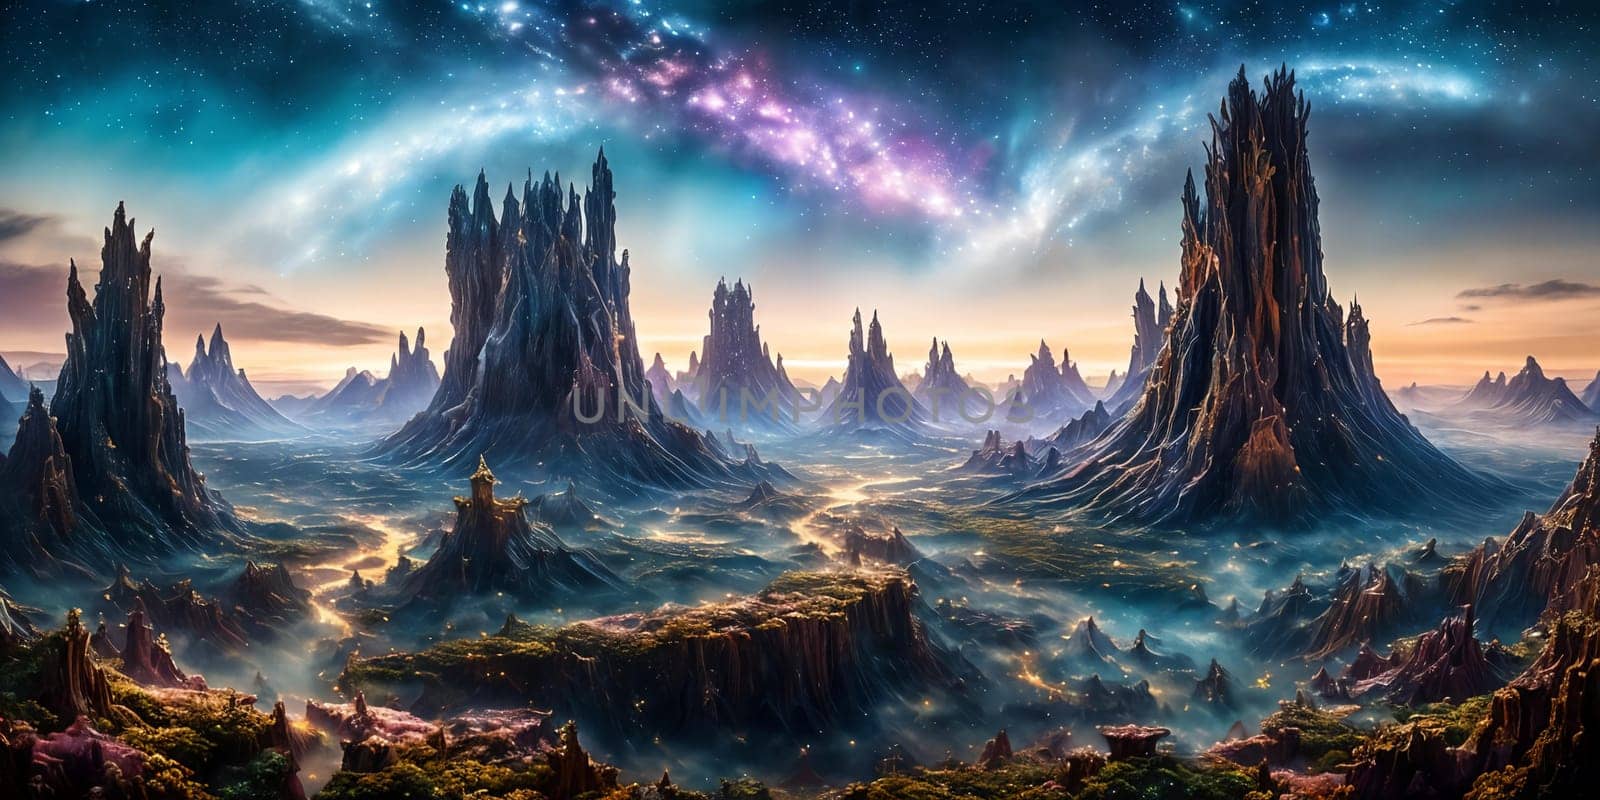 Celestial Kingdom. Otherworldly realm populated by majestic celestial beings and mythical creatures, set against a backdrop of shimmering constellations and swirling cosmic clouds.